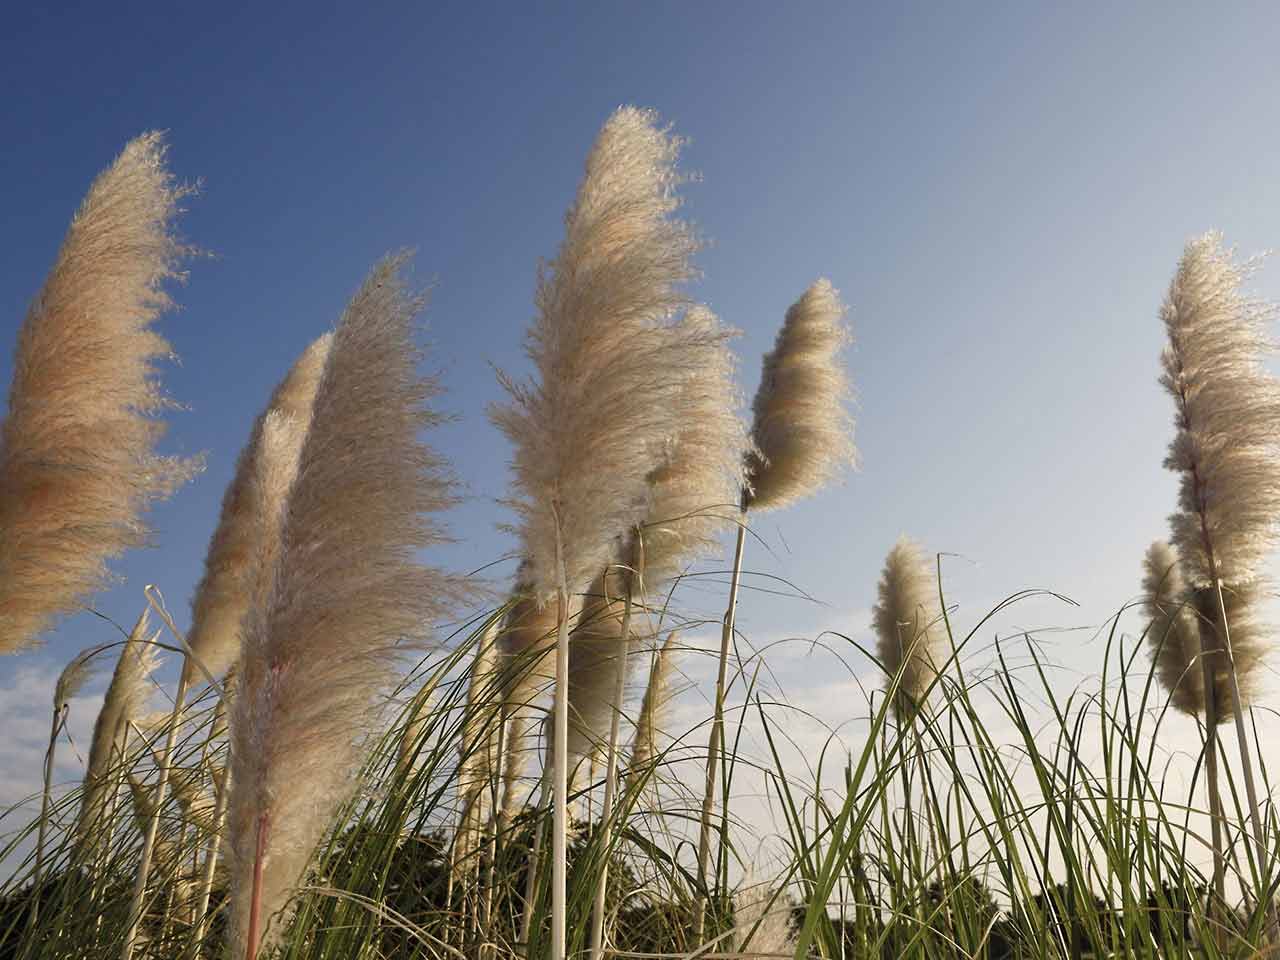 What Goes Well With Pampas Grass